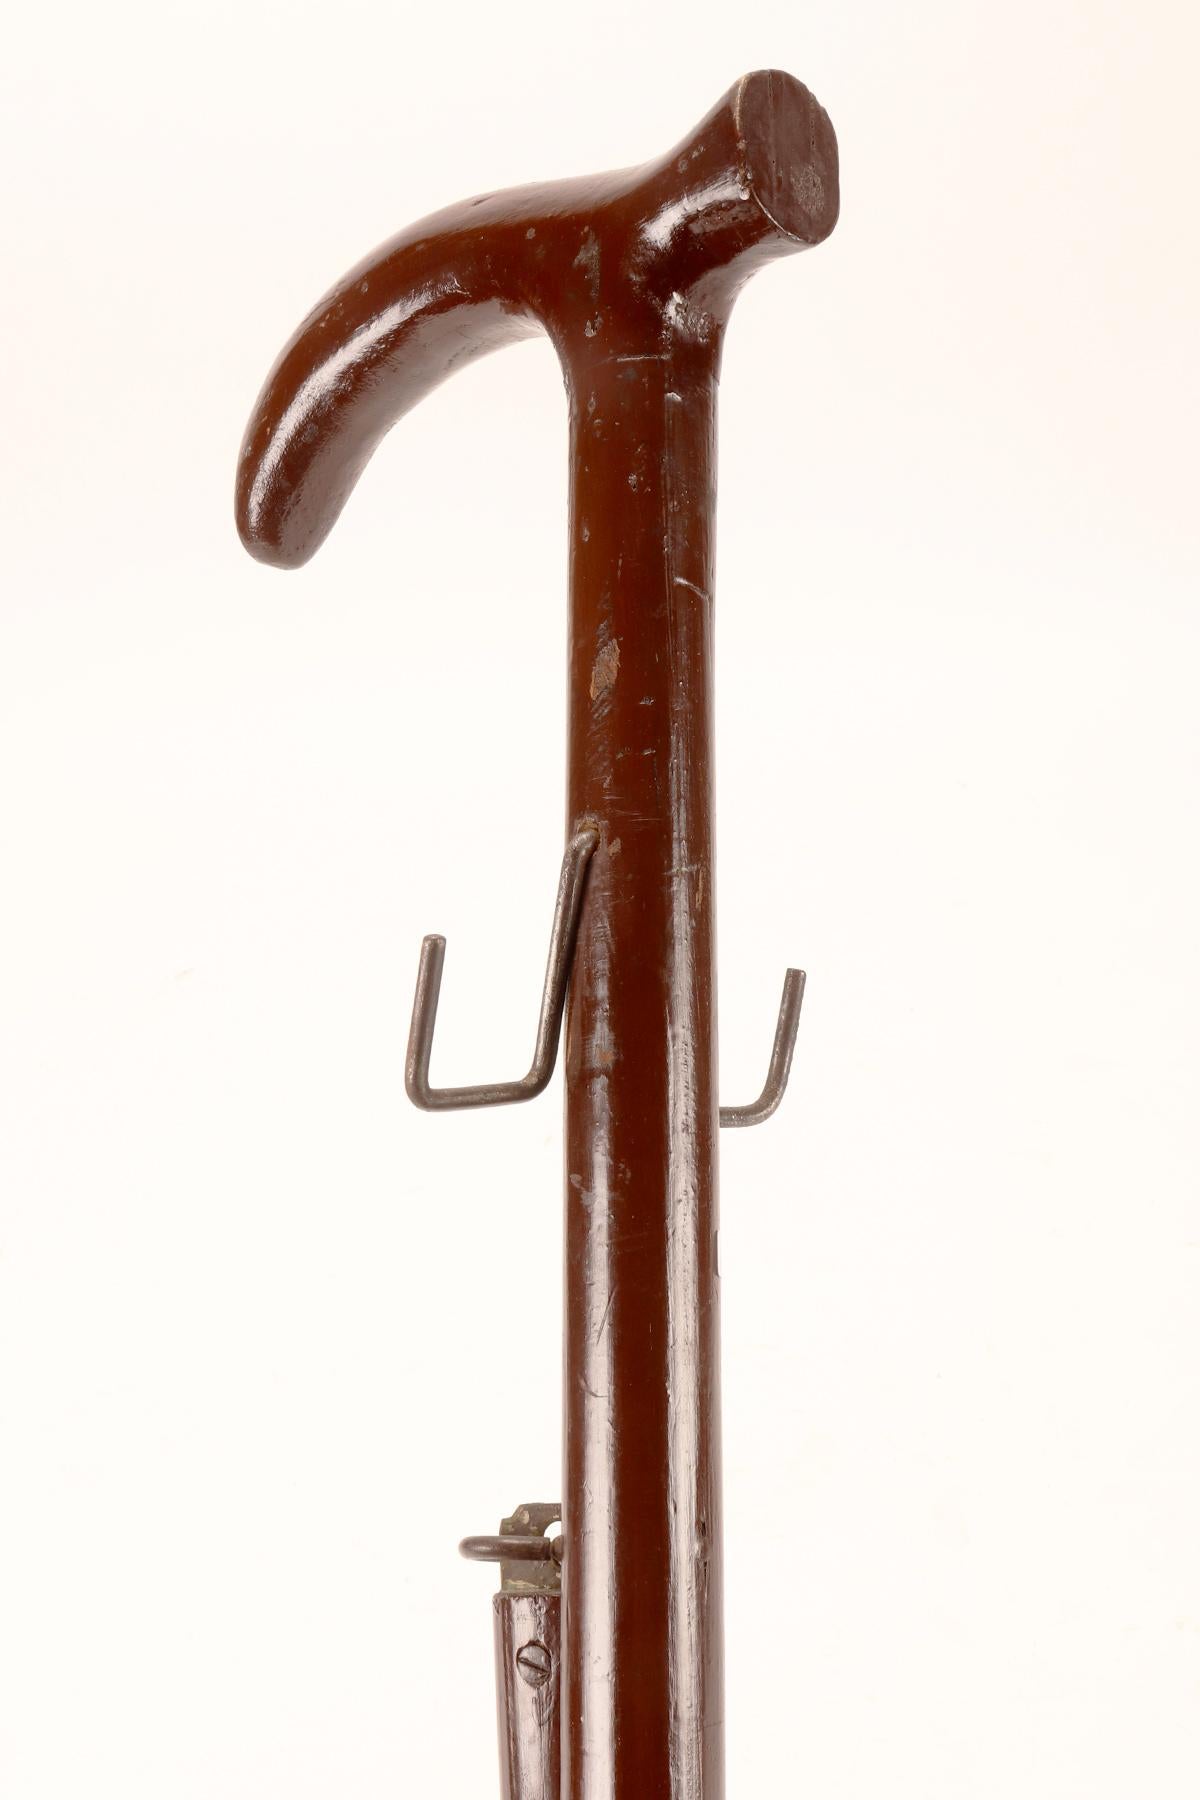 Gadget-system walking stick with bag holder function, Germany, 1920s. 1